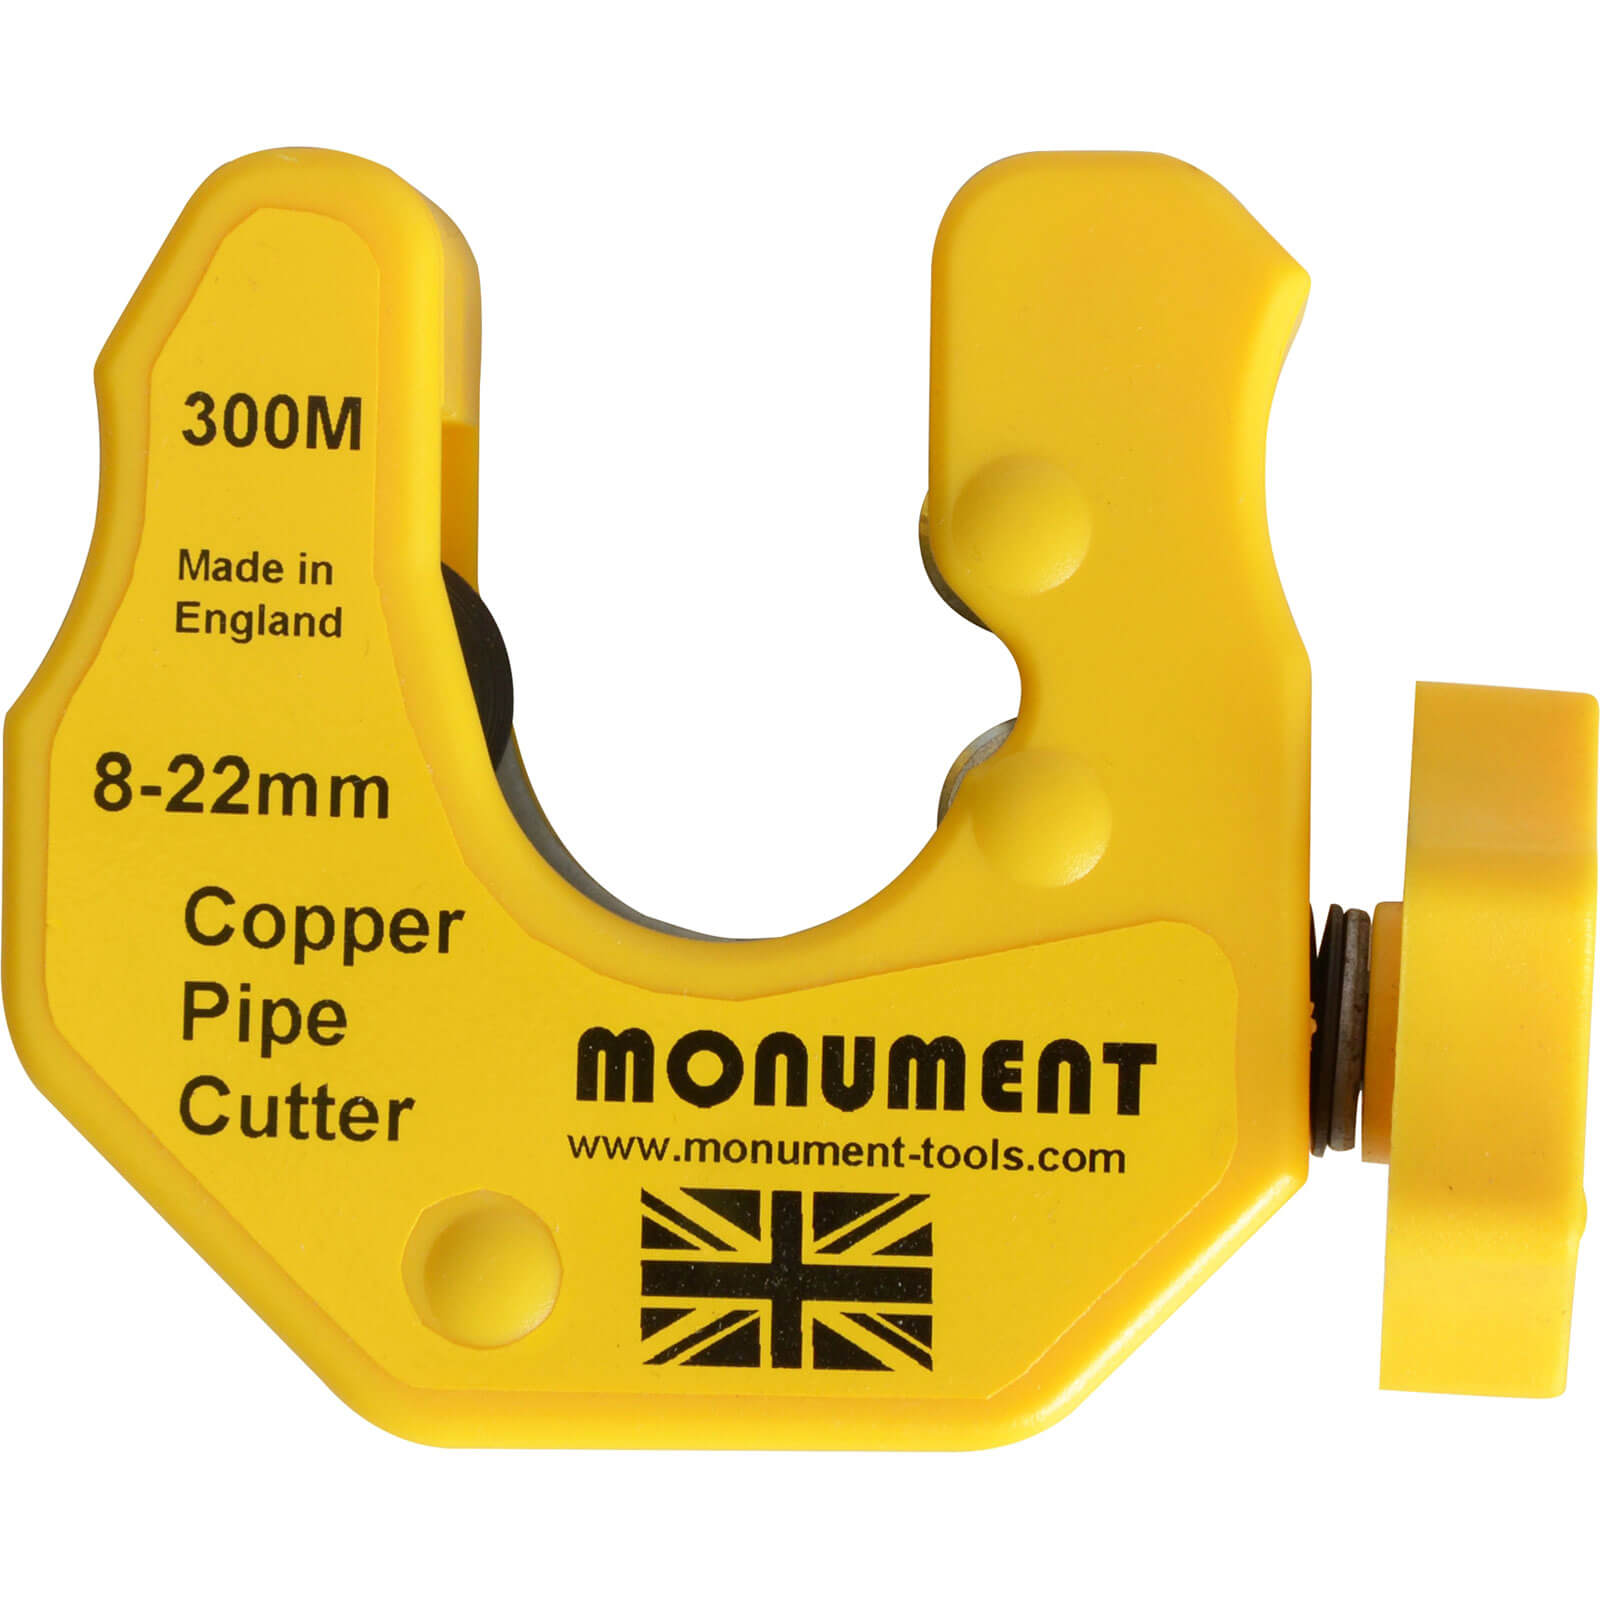 Photo of Monument 300m Semi Automatic Pipe Cutter 8mm- 22mm